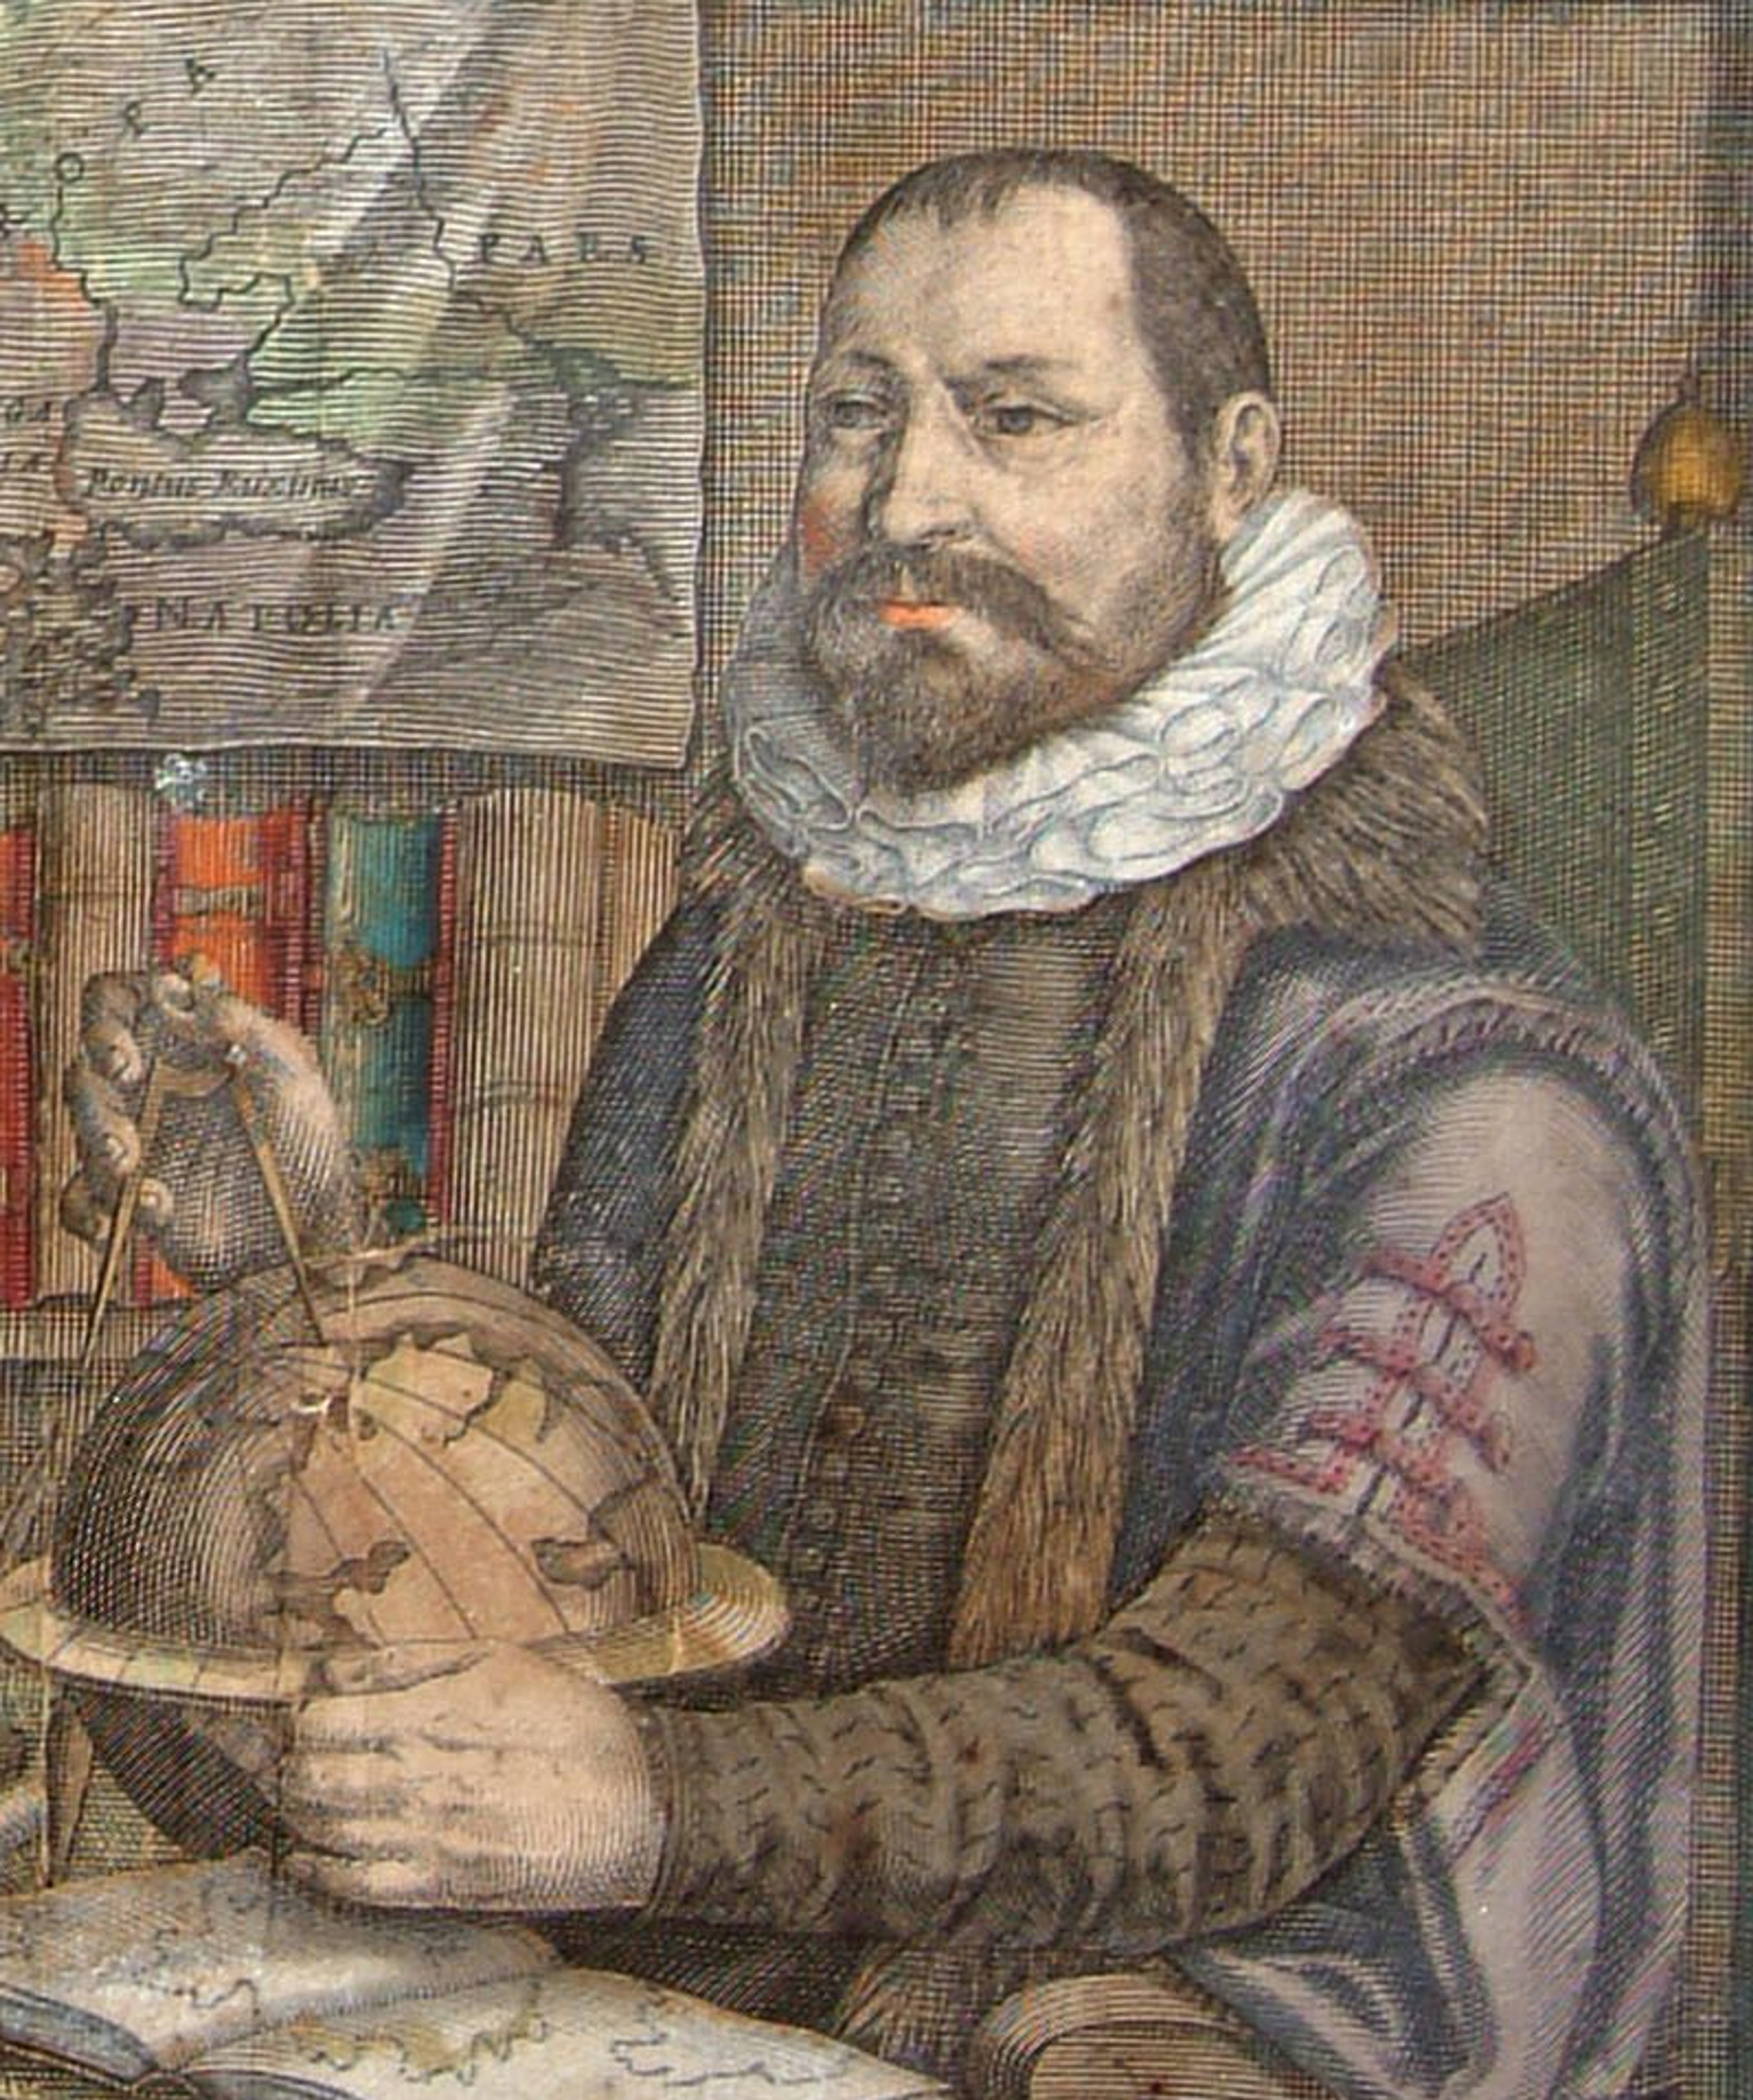 A colourful portrait of Jodocus Hondius I, a man, sat in front of an open book, a globe and holding a compass in his right hand over the globe.